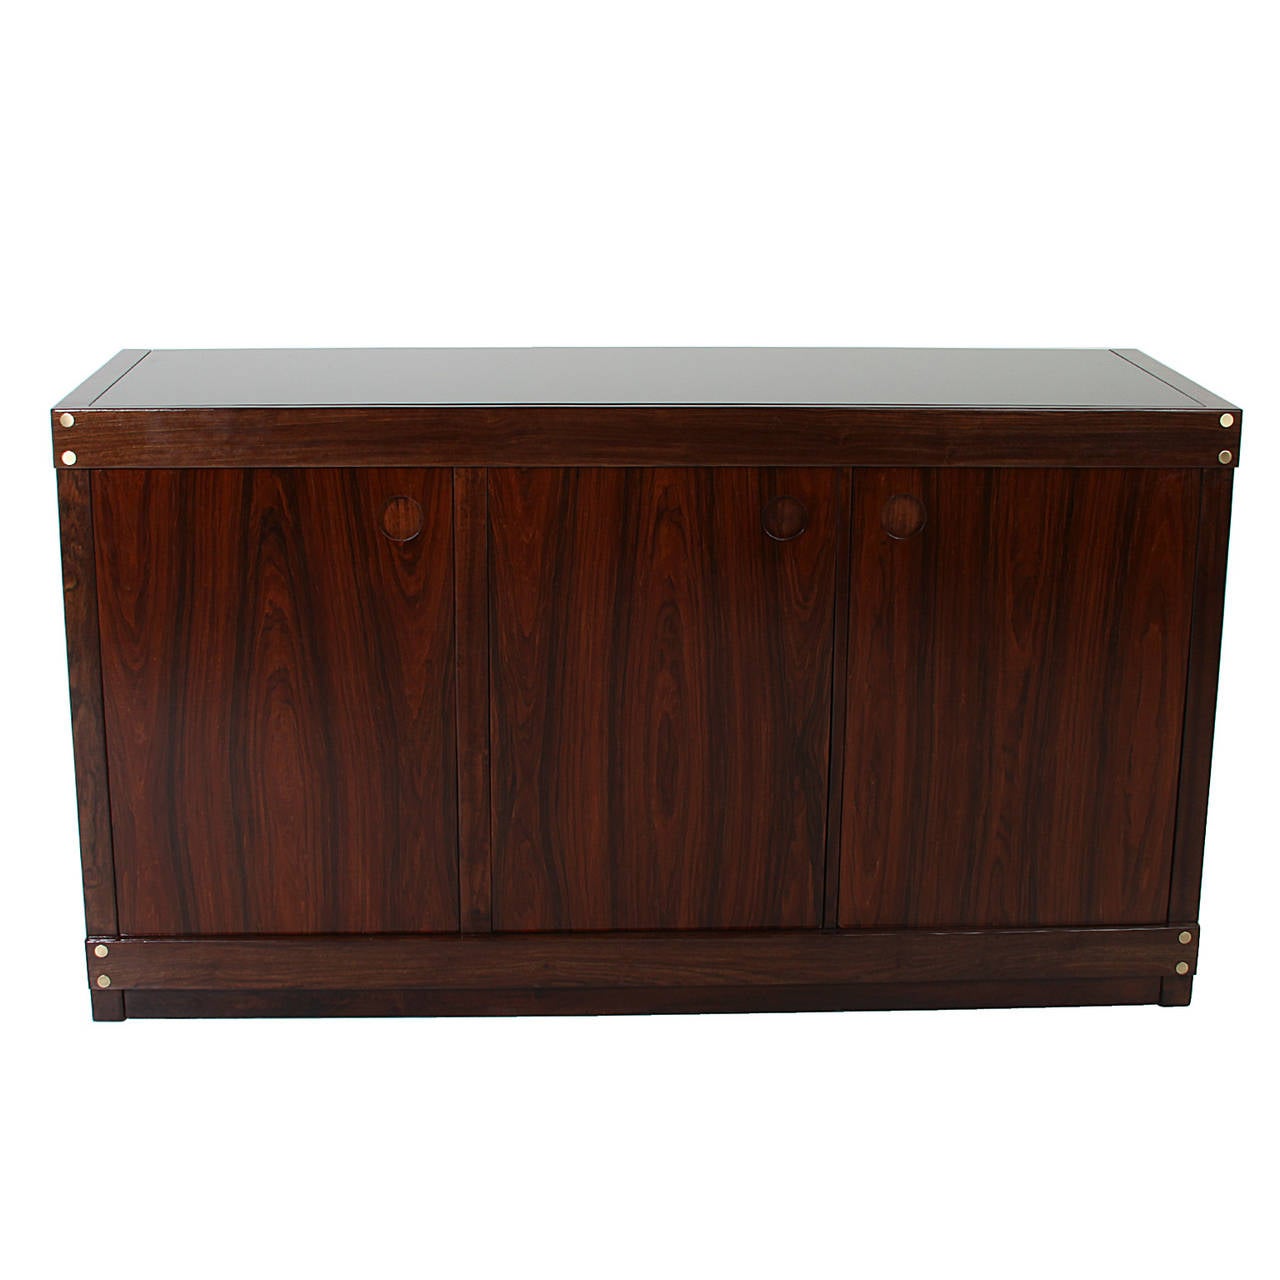 A stunning three-door Rosewood credenza or sideboard from Brazil, designed by Sergio Rodrigues. Featuring new black glass top, inset circular pulls and brass plug details. Newly refinished in Satin Lacquer.

Many pieces are stored in our